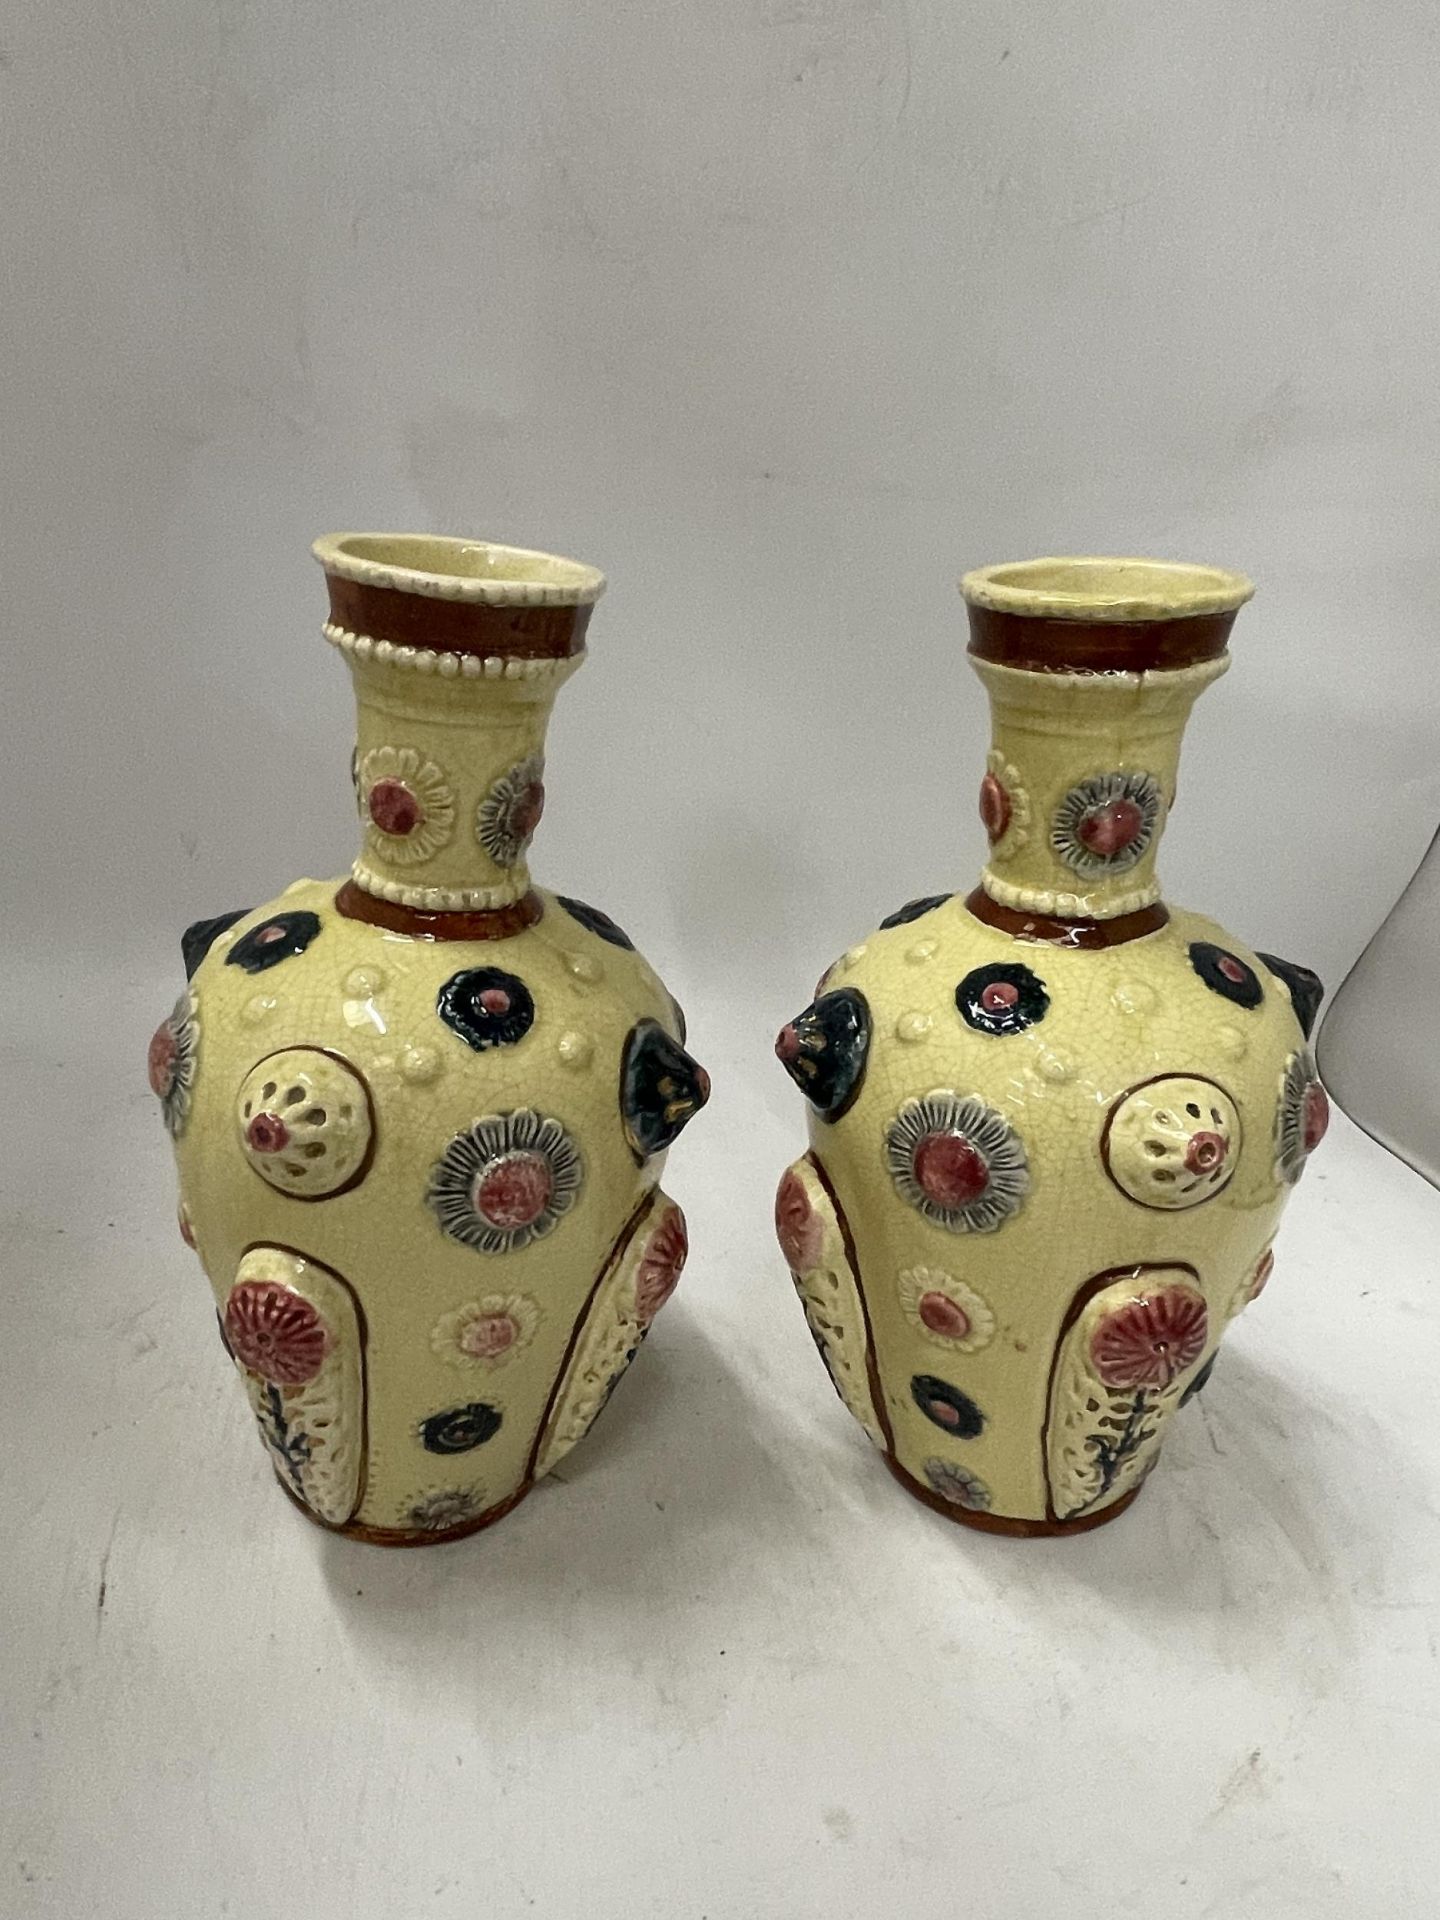 A PAIR OF CONTINENTAL PORCELAIN VASES IN THE ZSOLNAY PECS STYLE, UNMARKED